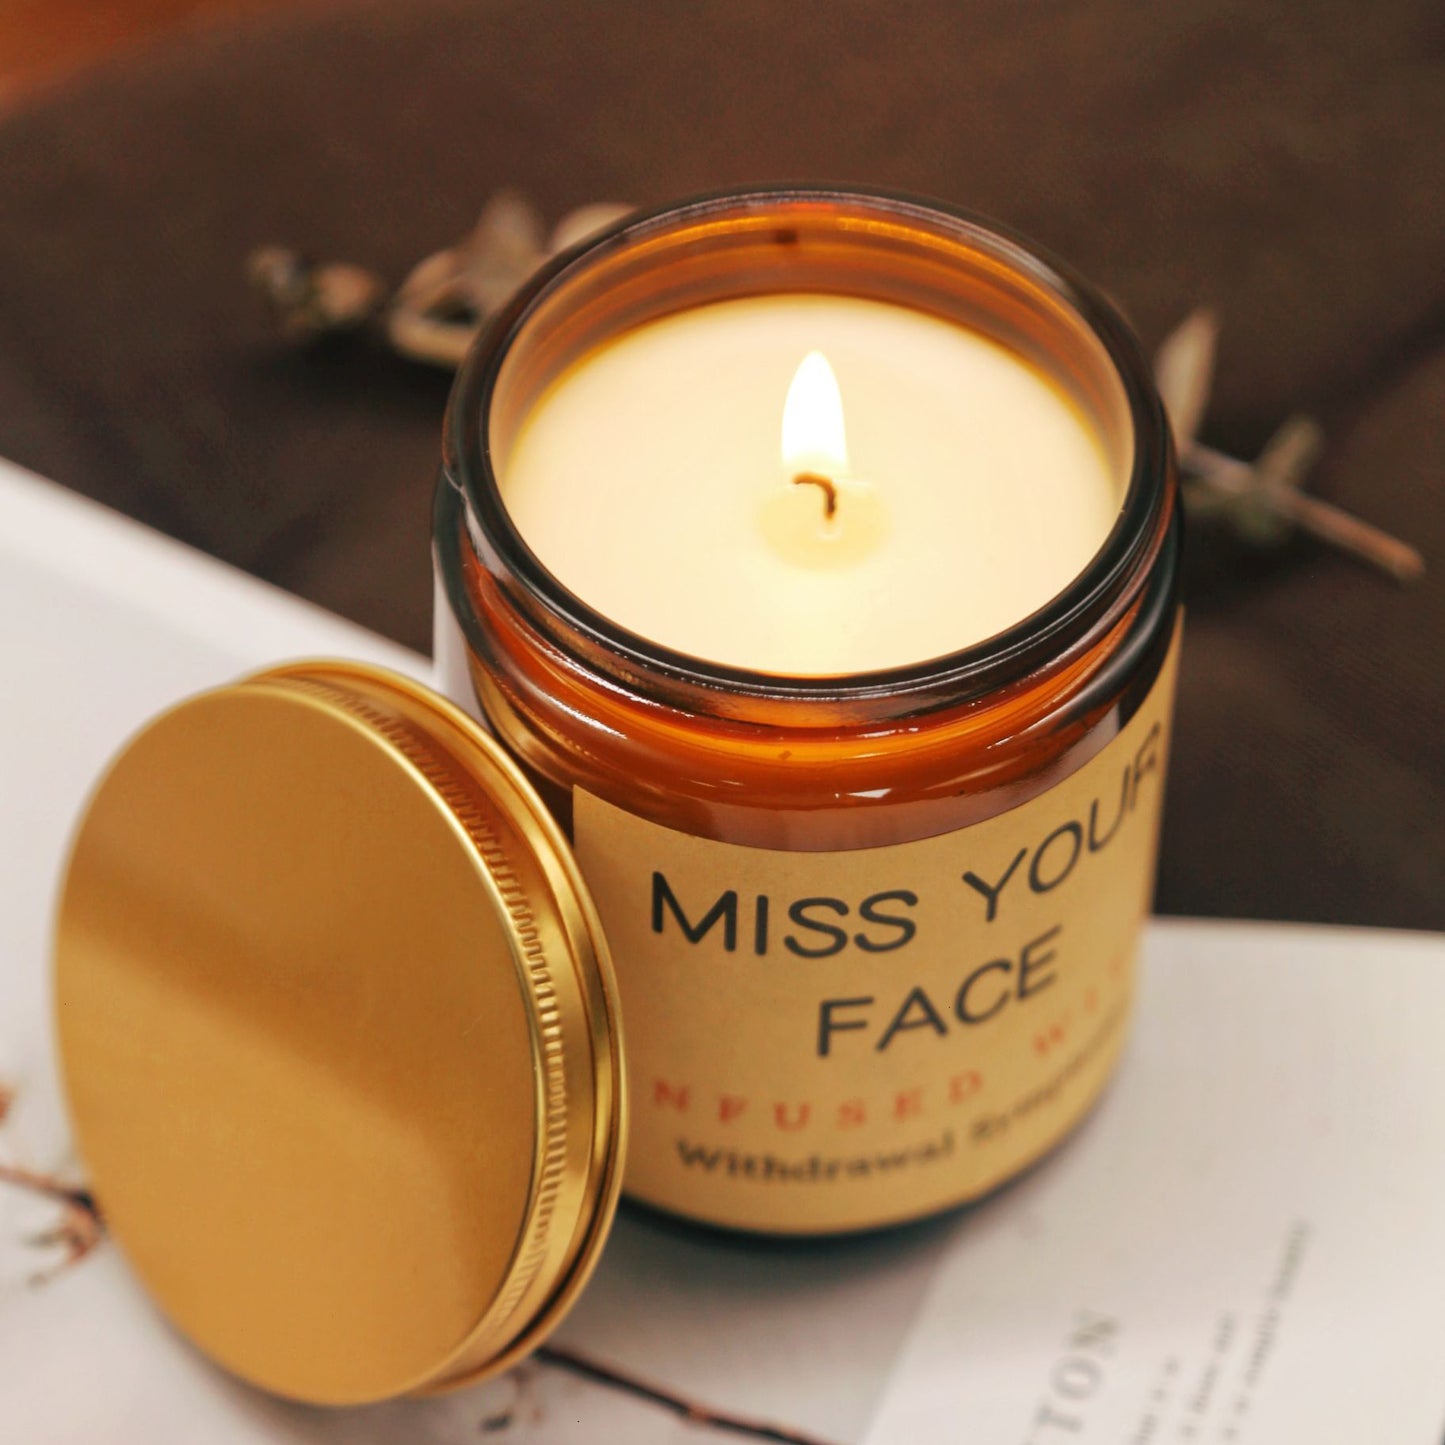 "Miss Your Face" Aroma Candle Gift